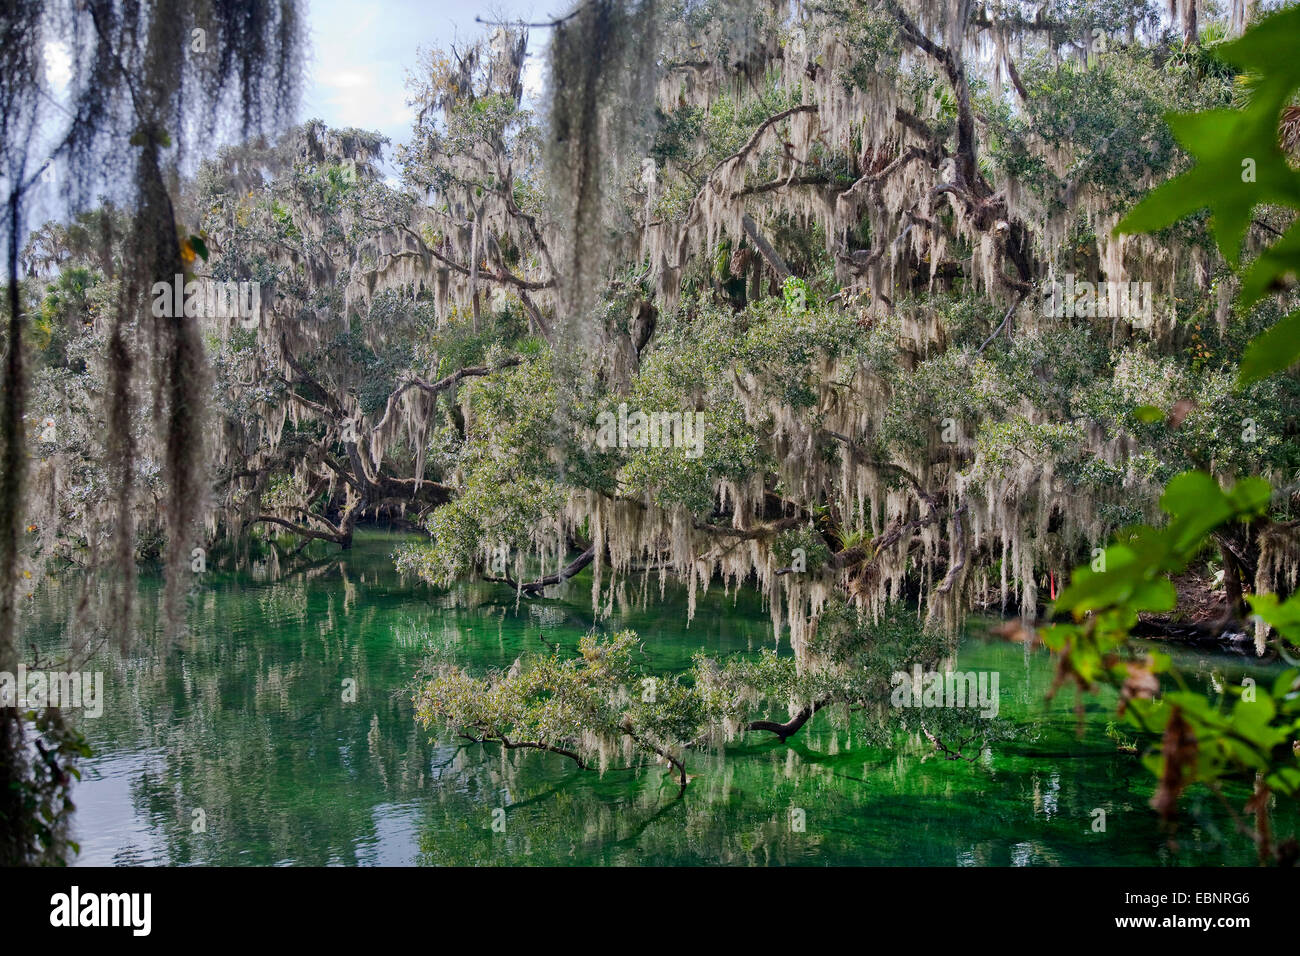 old man's beard, spanish moss (Tillandsia usneoides), tropical vegetation with spanish mosses at the riverbank, USA, Florida, Blue Spring State Park Stock Photo